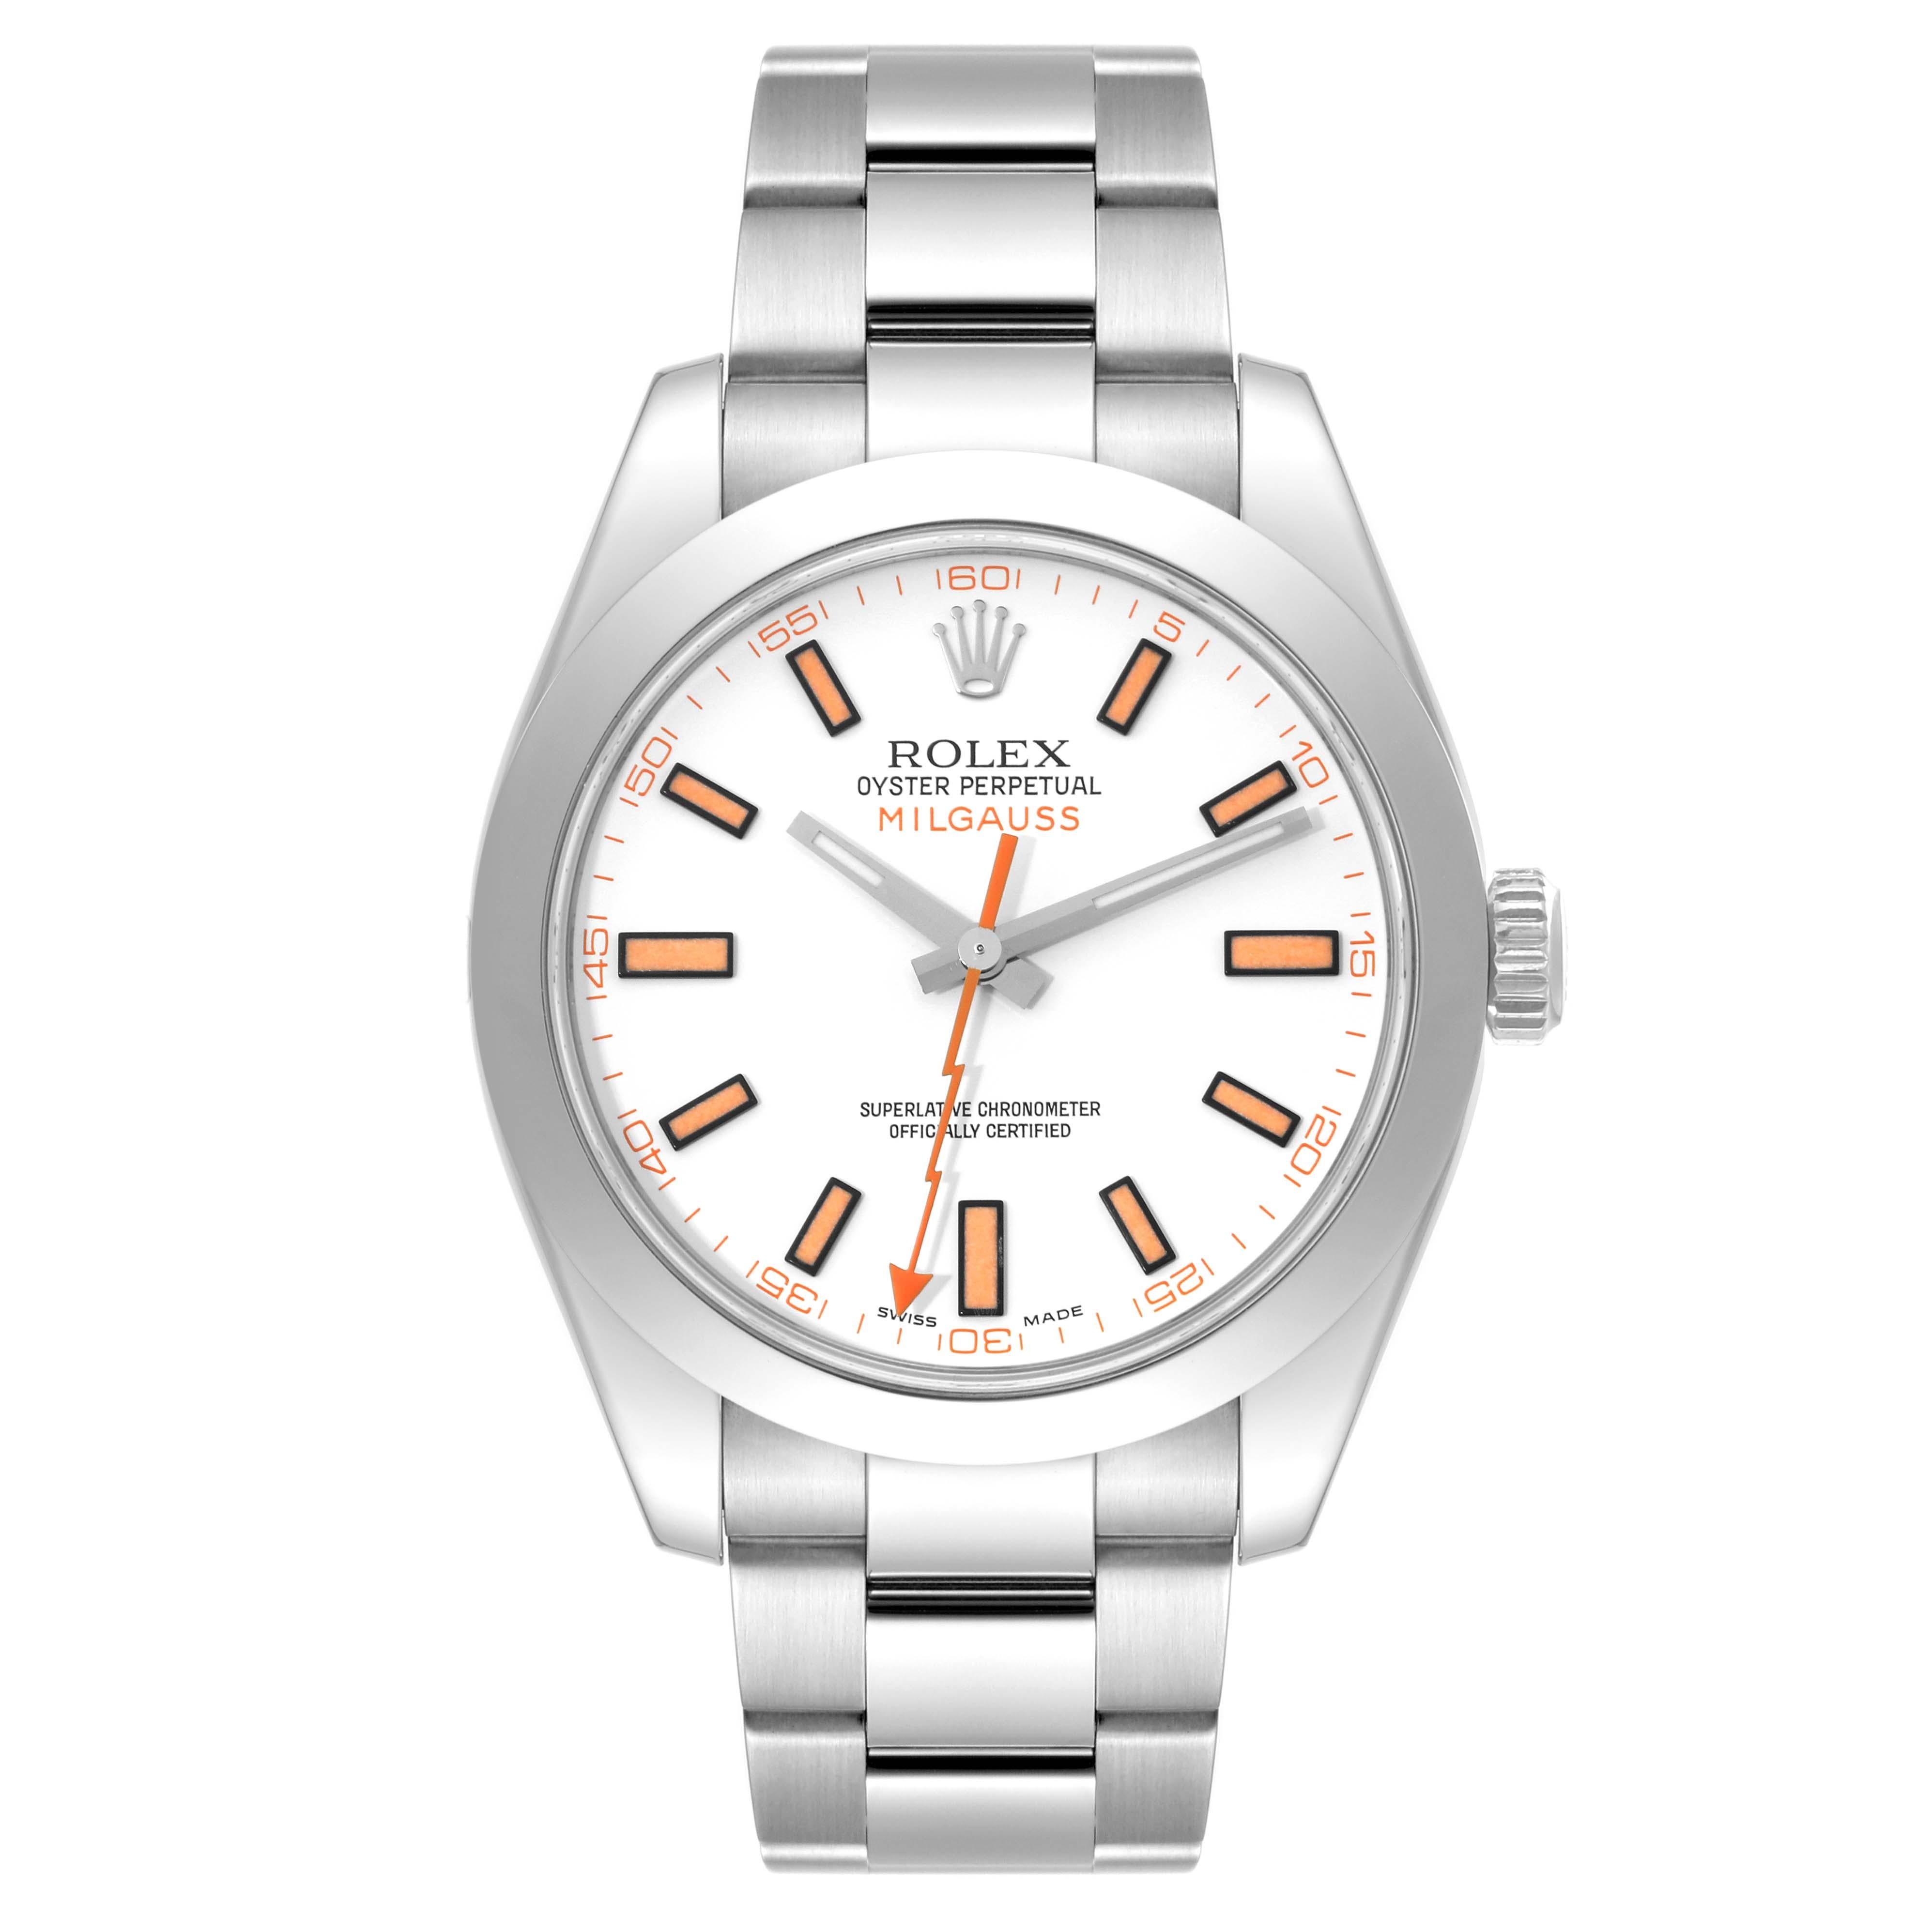 Rolex Milgauss White Dial Orange Markers Steel Mens Watch 116400. Officially certified chronometer self-winding movement. Stainless steel case 40.0 mm in diameter. Stainless steel smooth domed bezel. Scratch resistant sapphire crystal. White dial